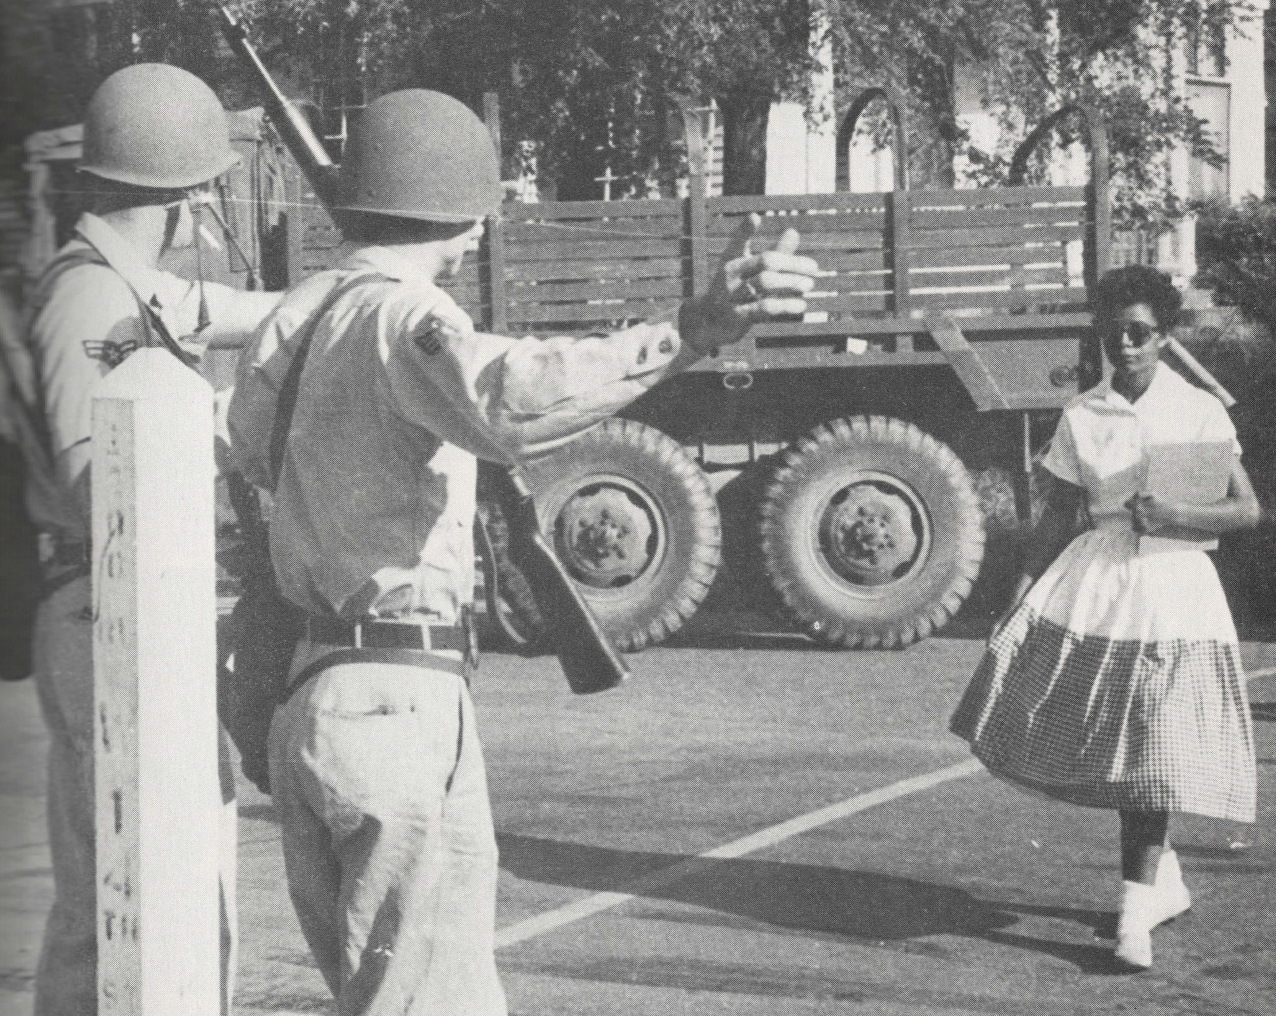 Black and white photo of young Black student in dress and sunglasses walking towards two National Guard members